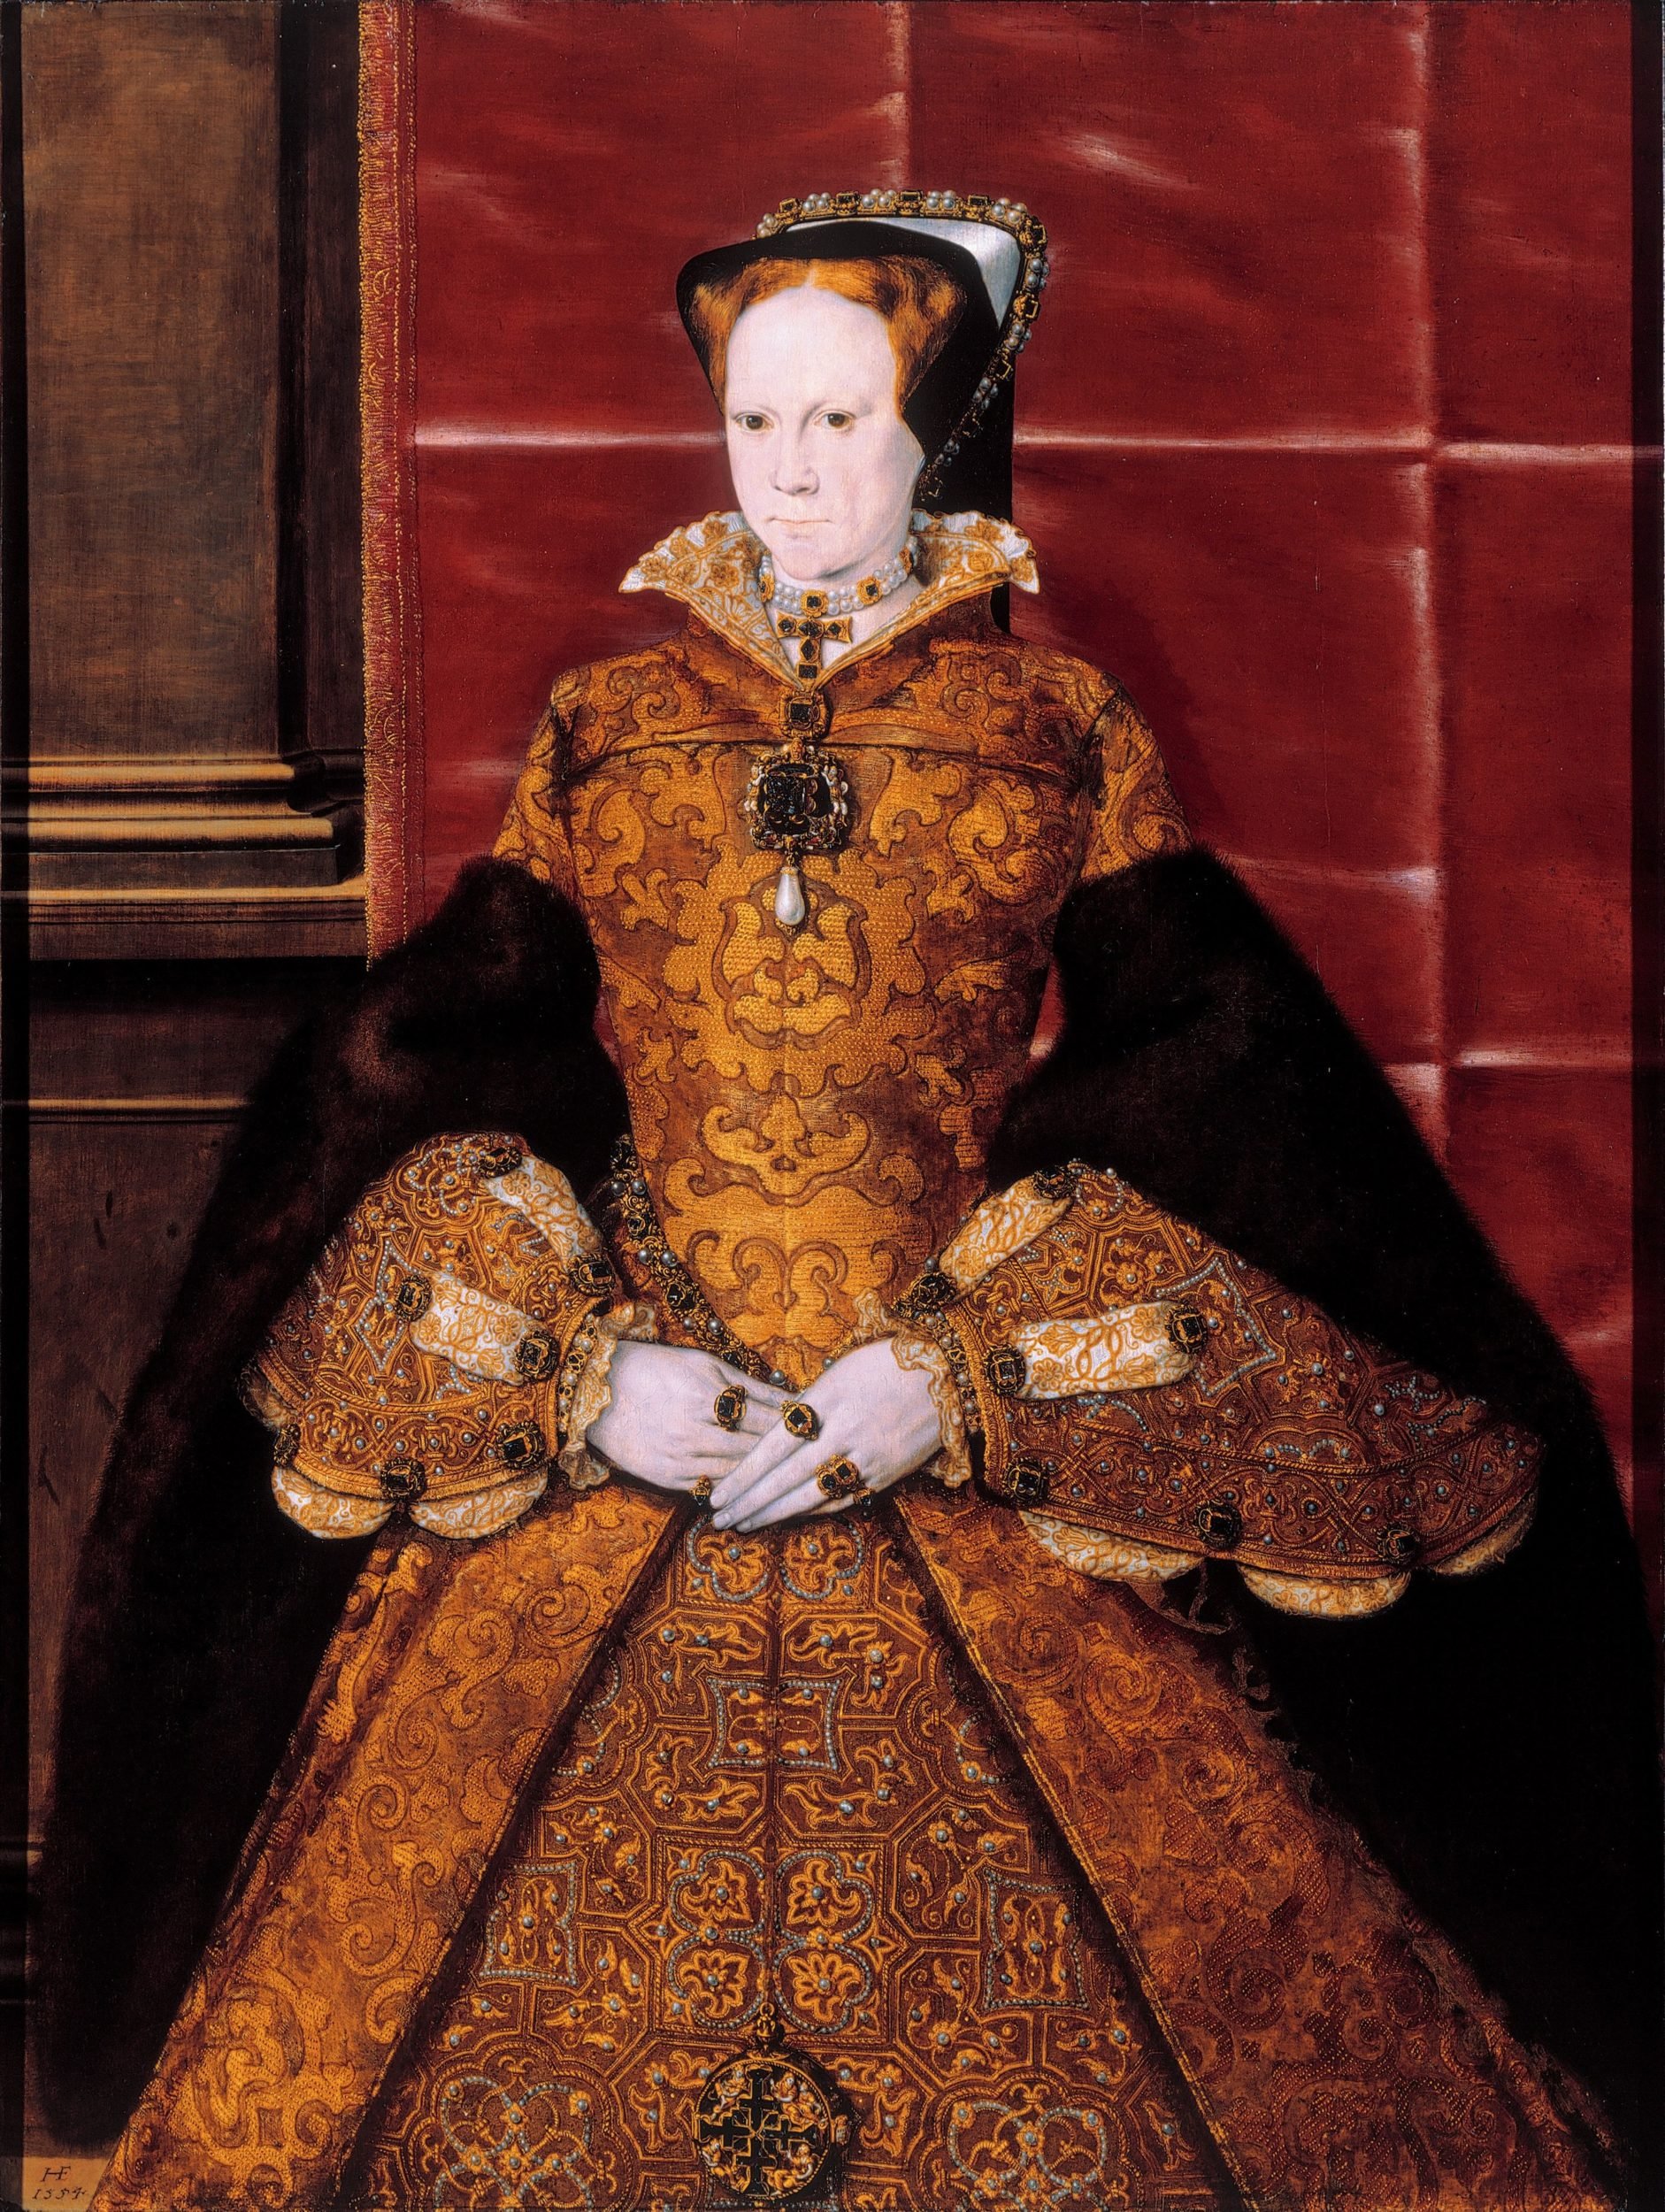 Mary I by Hans Eworth (with the reliquary dangling from her girdle)